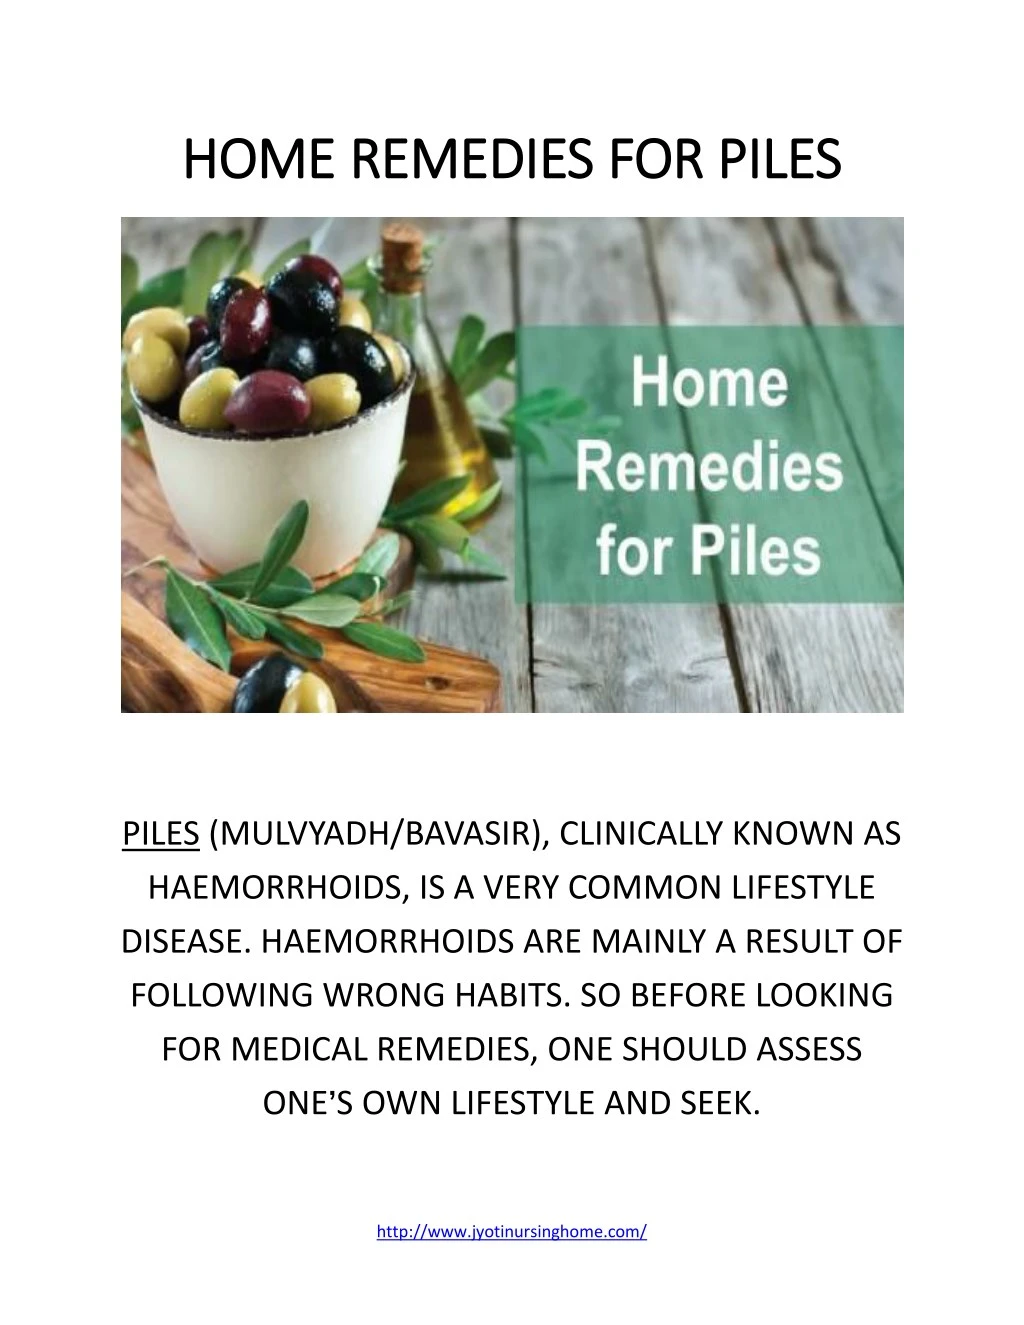 home remedies for pi home remedies for piles